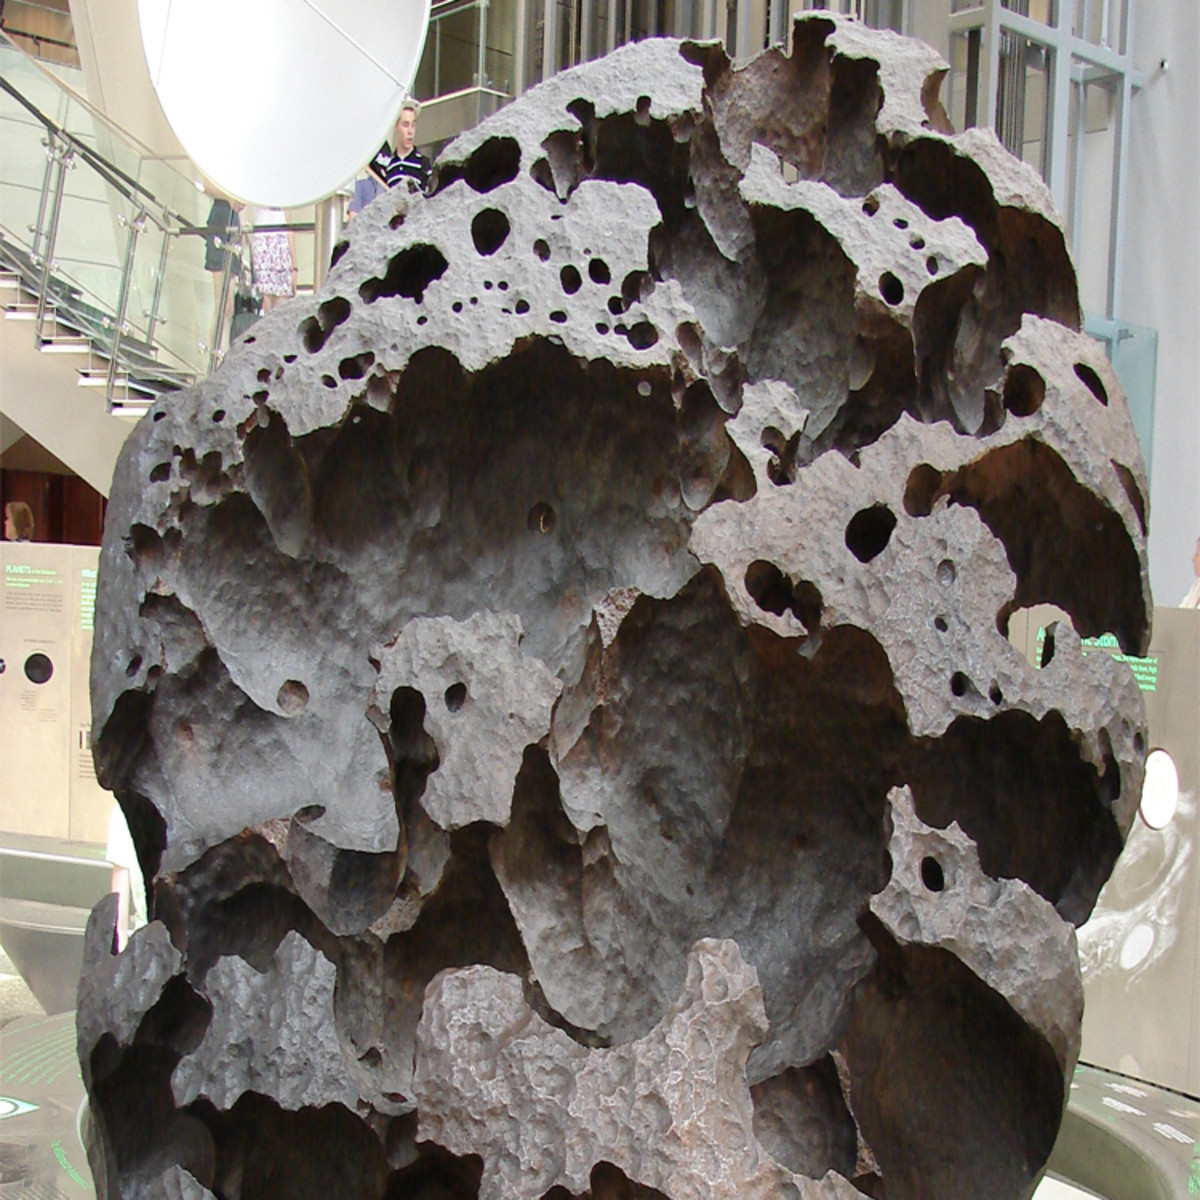 The Willamette Meteorite is the largest meteorite ever found in North America, and the sixth largest in the world.